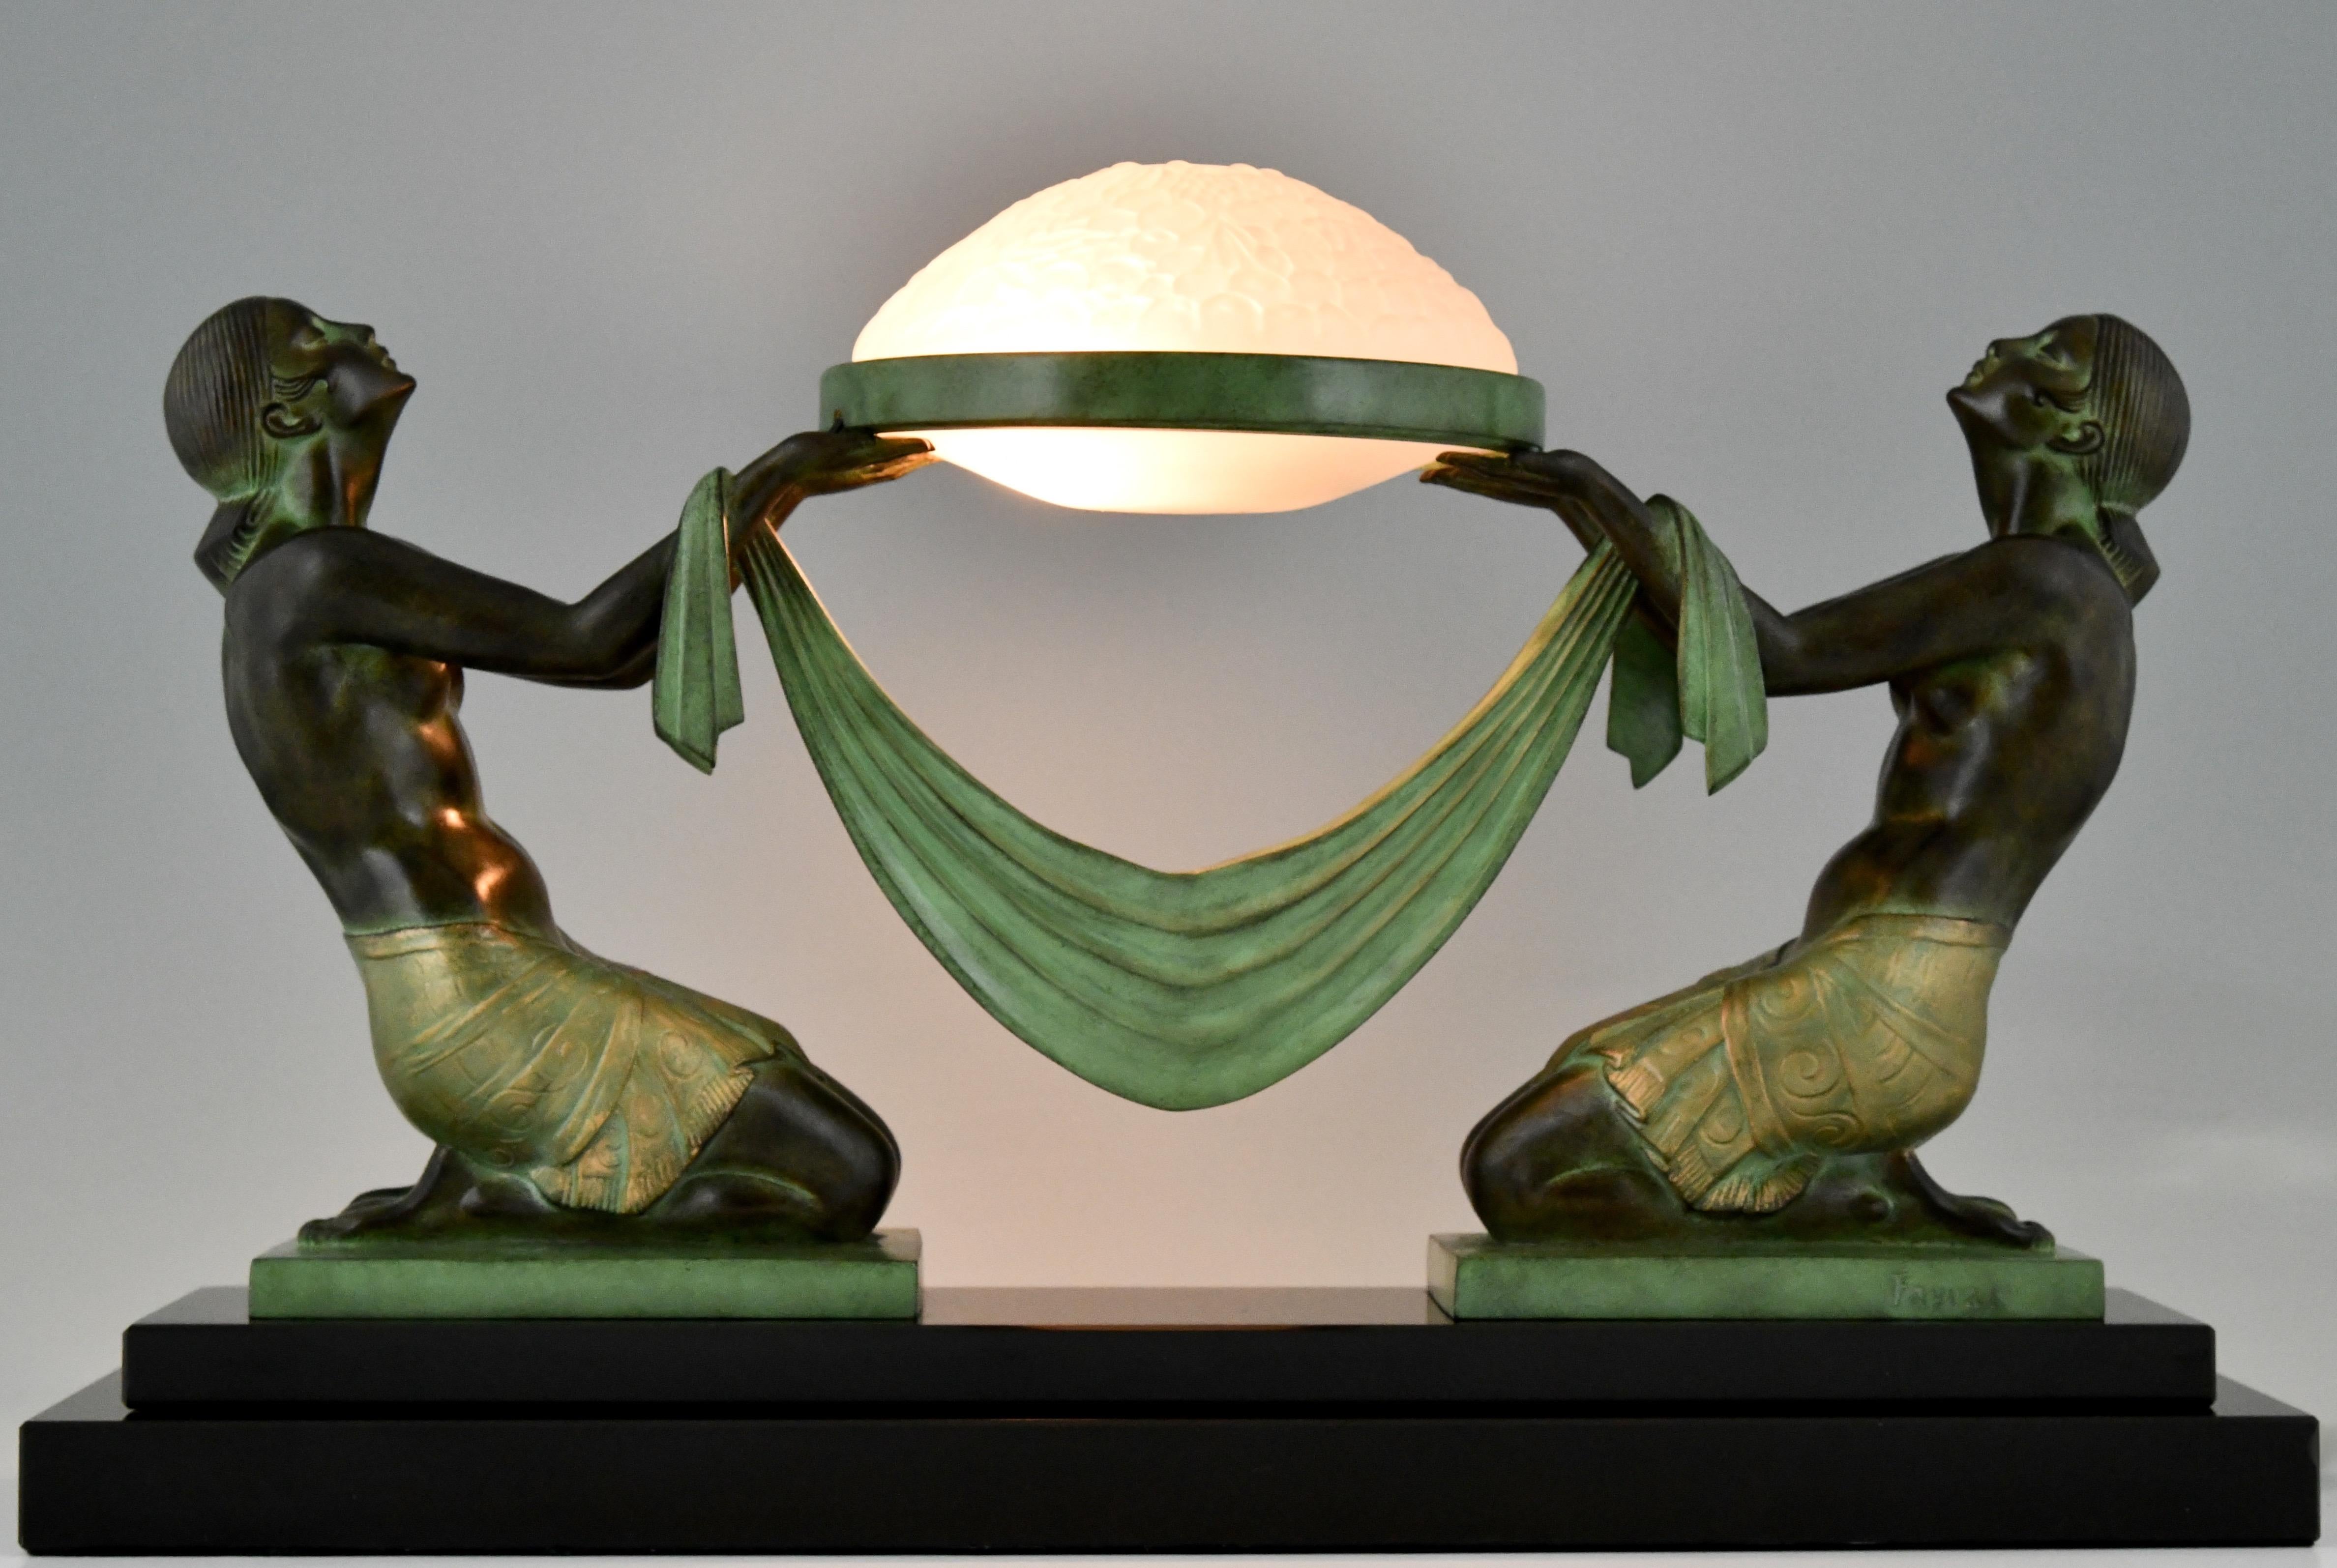 Art Deco style lamp with kneeling nudes holding a glass shade Offrande signed Fayral, pseudonym of Pierre Le Faguays cast at the Max Le Verrier foundry. 
Design Ca. 1925.
Patinated Art metal. Glass shade. Black marble base. 
Posthumous contemporary